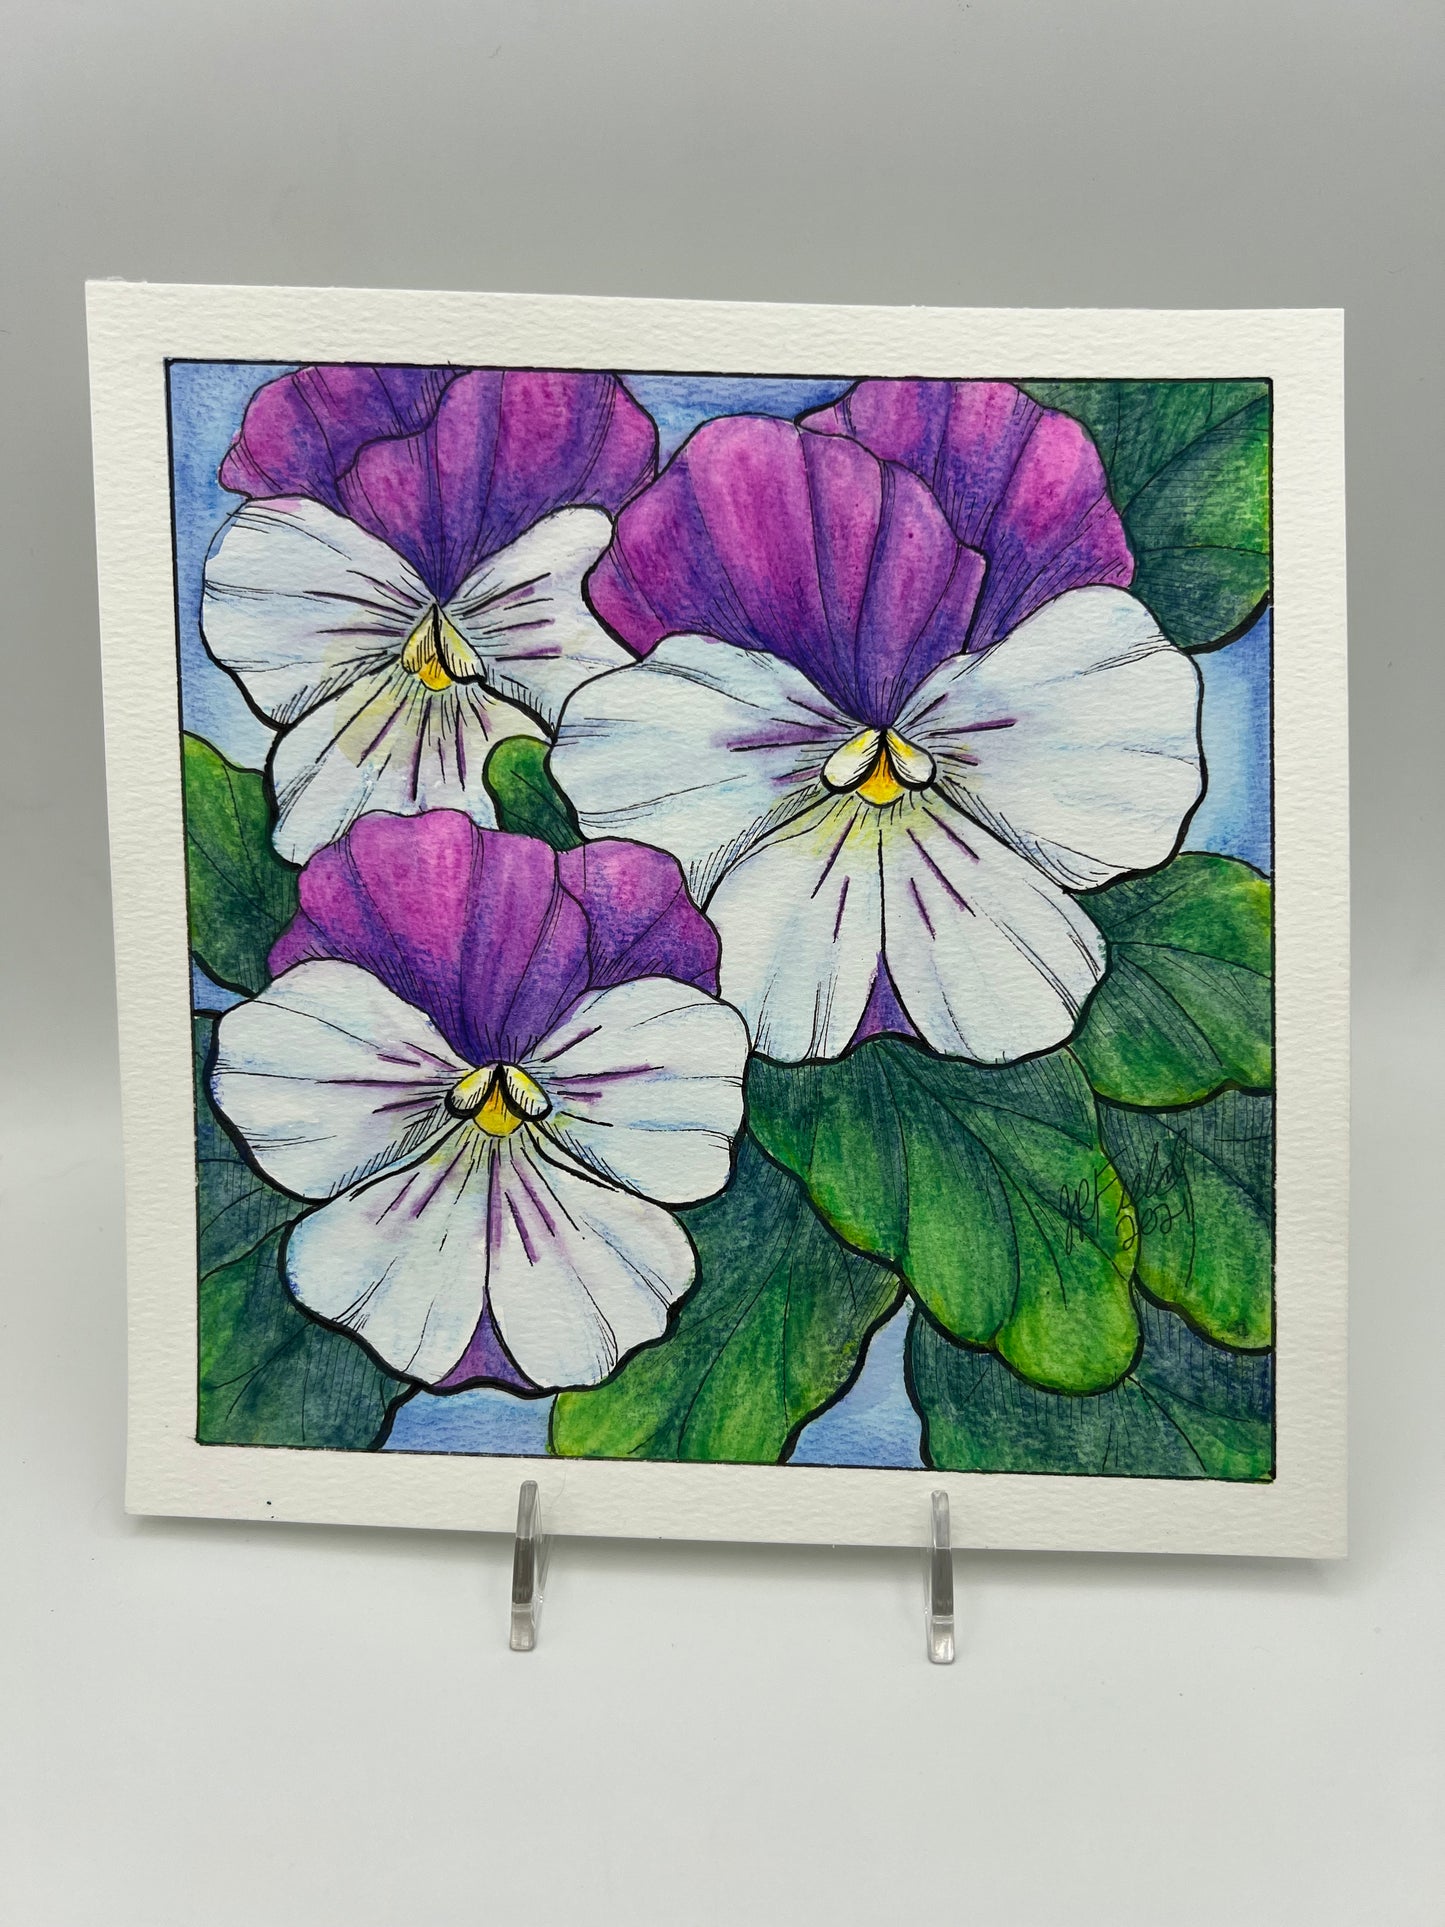 Pansies from Blossoms & Blooms Vol 1